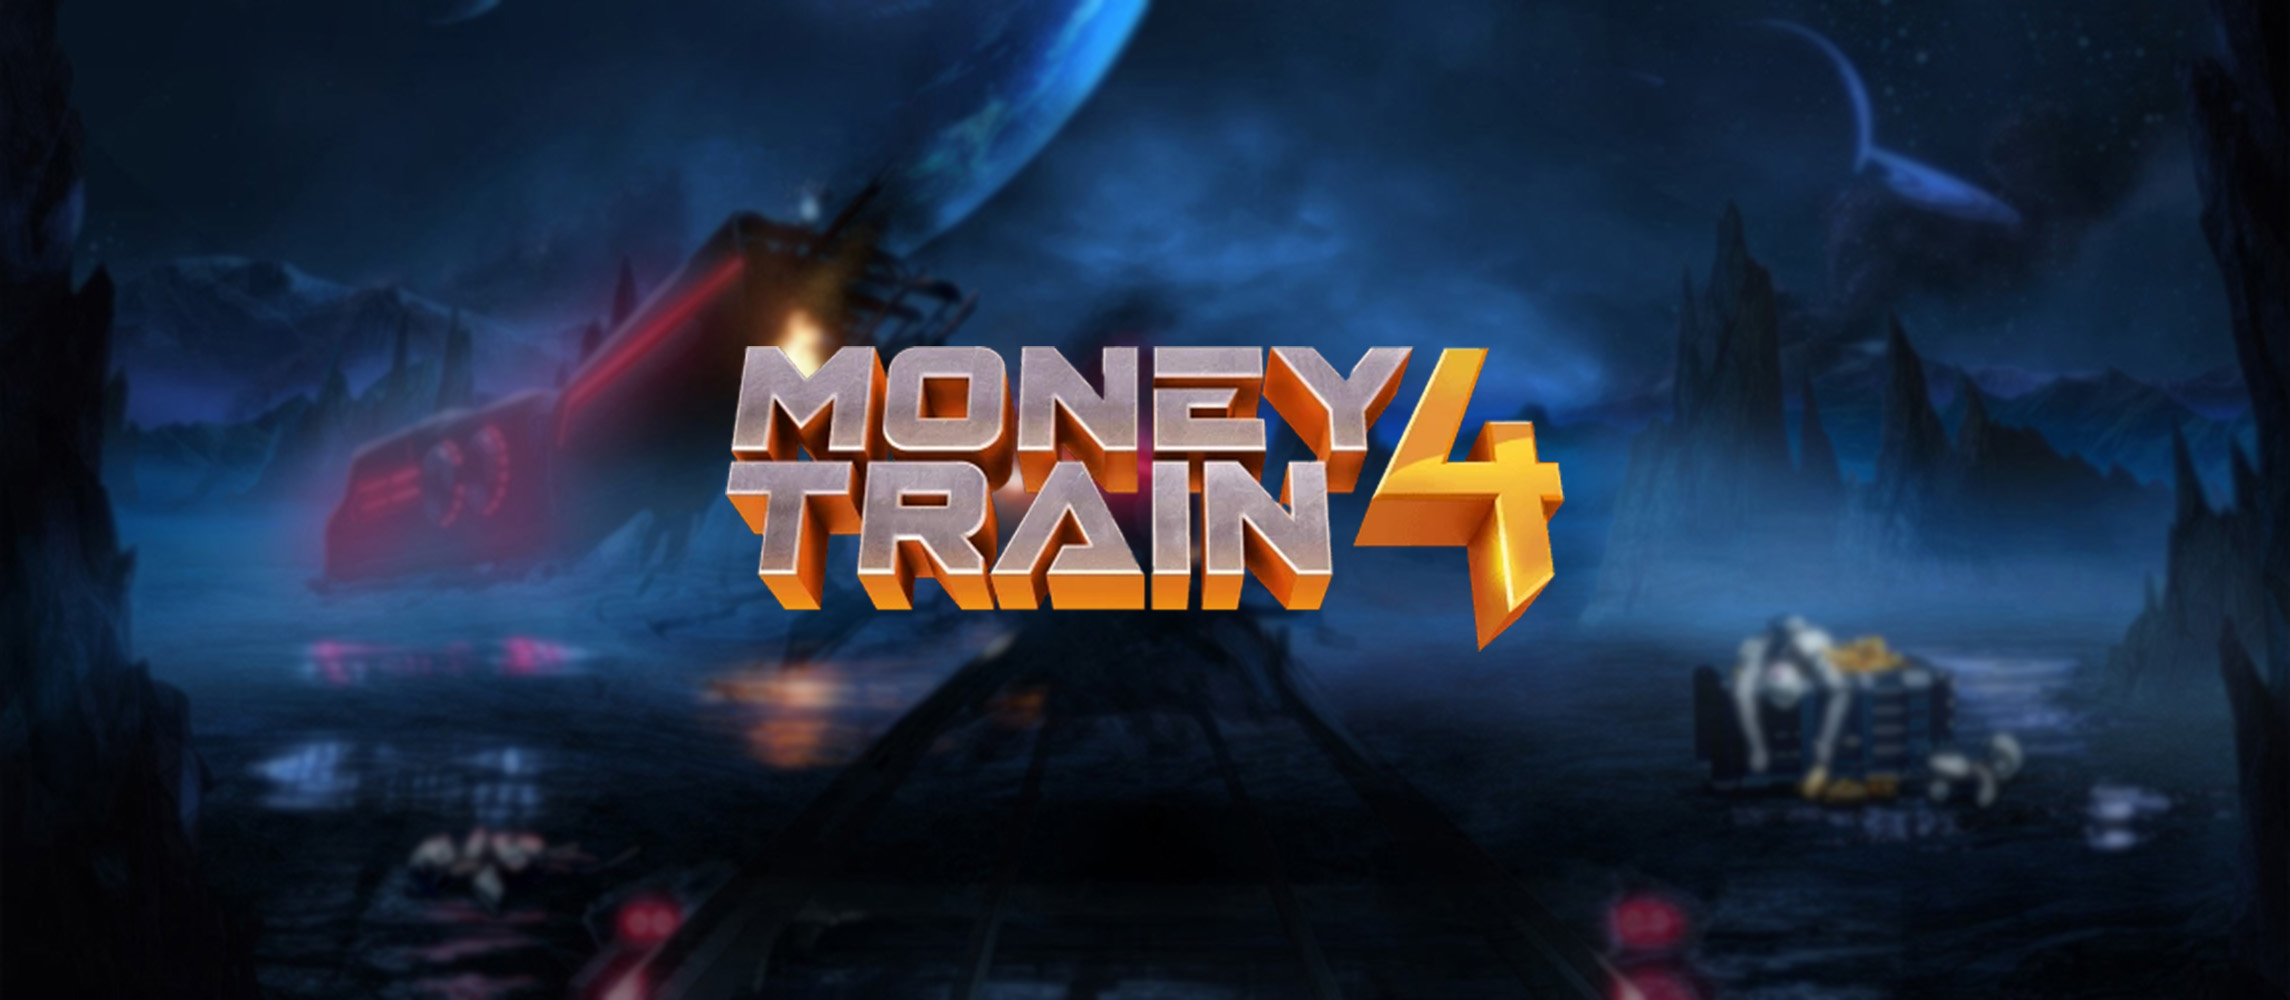 Money Train 4 slot - The latest release by the hit Relax Gaming's series